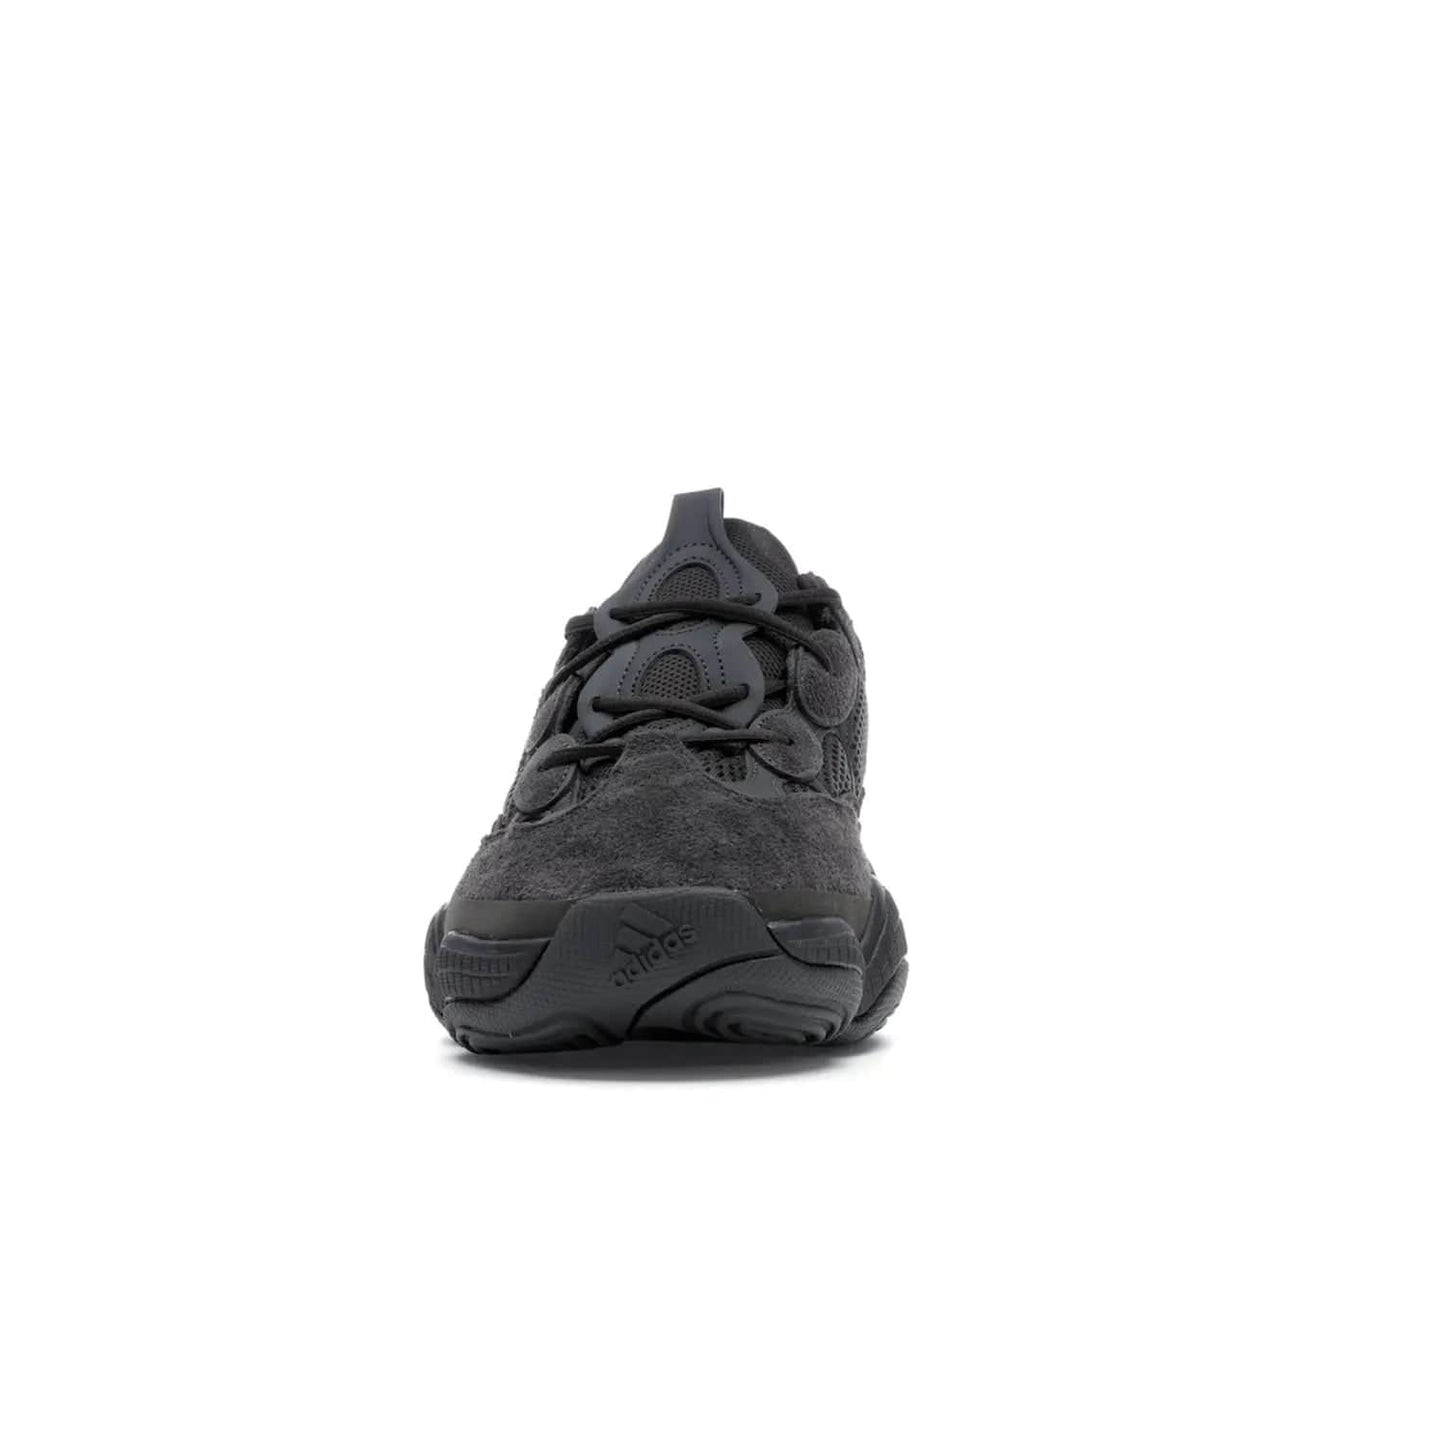 adidas Yeezy 500 Utility Black - Image 11 - Only at www.BallersClubKickz.com - Iconic adidas Yeezy 500 Utility Black in All-Black colorway. Durable black mesh and suede upper with adiPRENE® sole delivers comfort and support. Be unstoppable with the Yeezy 500 Utility Black. Released July 2018.